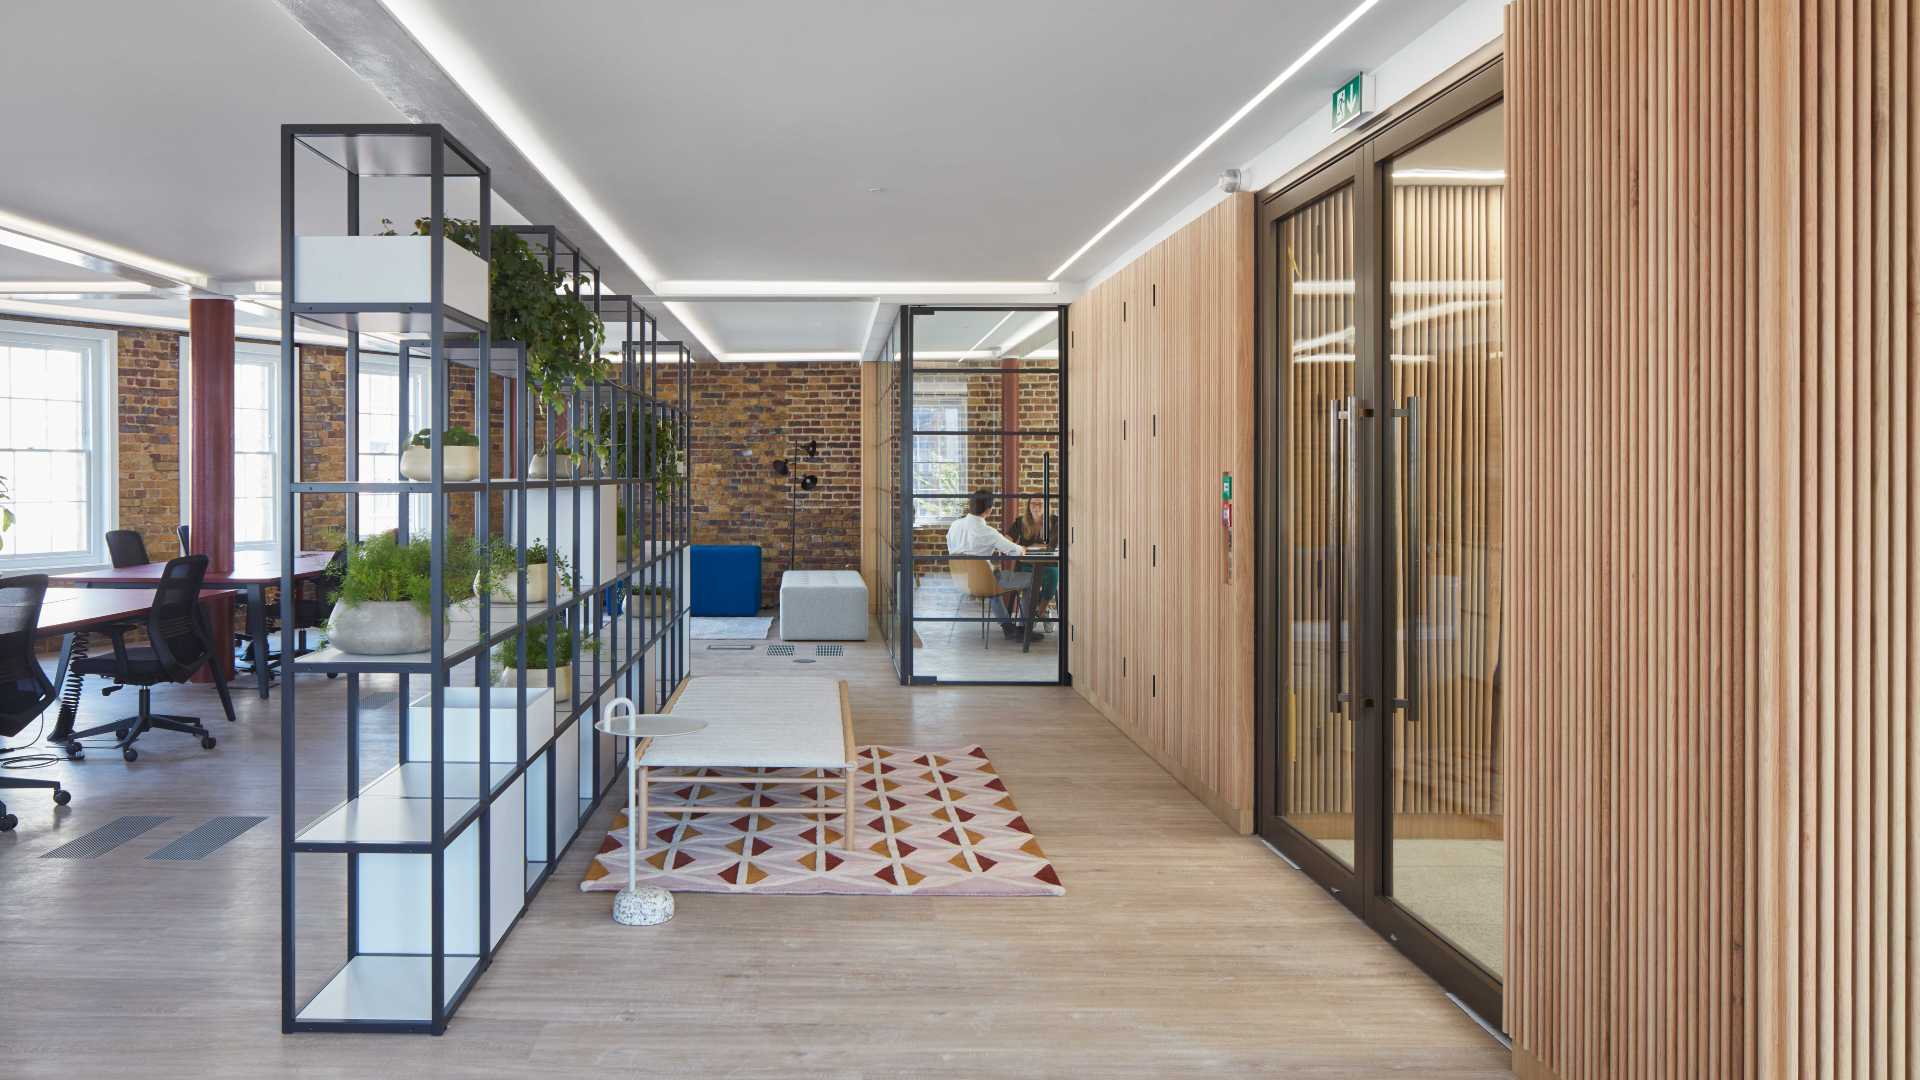 A former Victorian artisan tenement block that has been rebuilt behind a retained façade to provide exceptional office space, Pennybank won in the Projects Up To 1,500 m2 category.